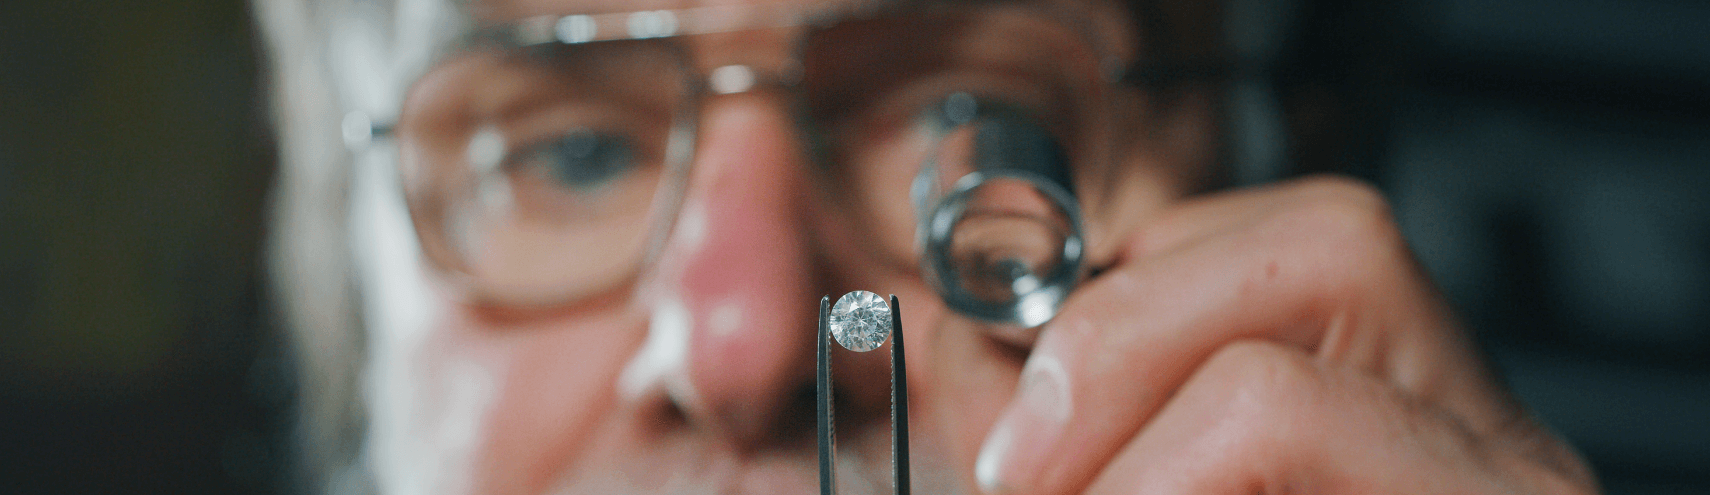 An older man looking into a diamond as a representation of analyzing data quality